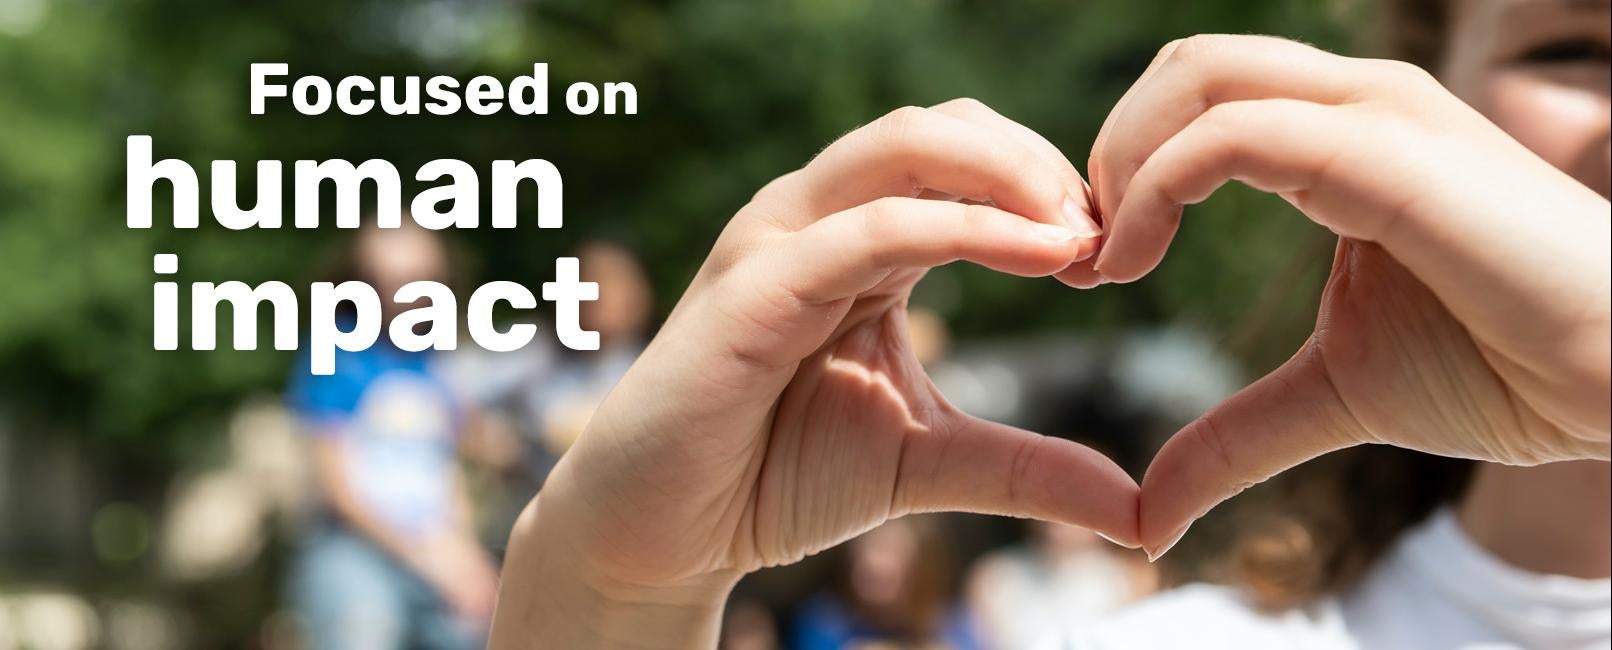 Hands coming together to form heart: Focused on human impact text over image